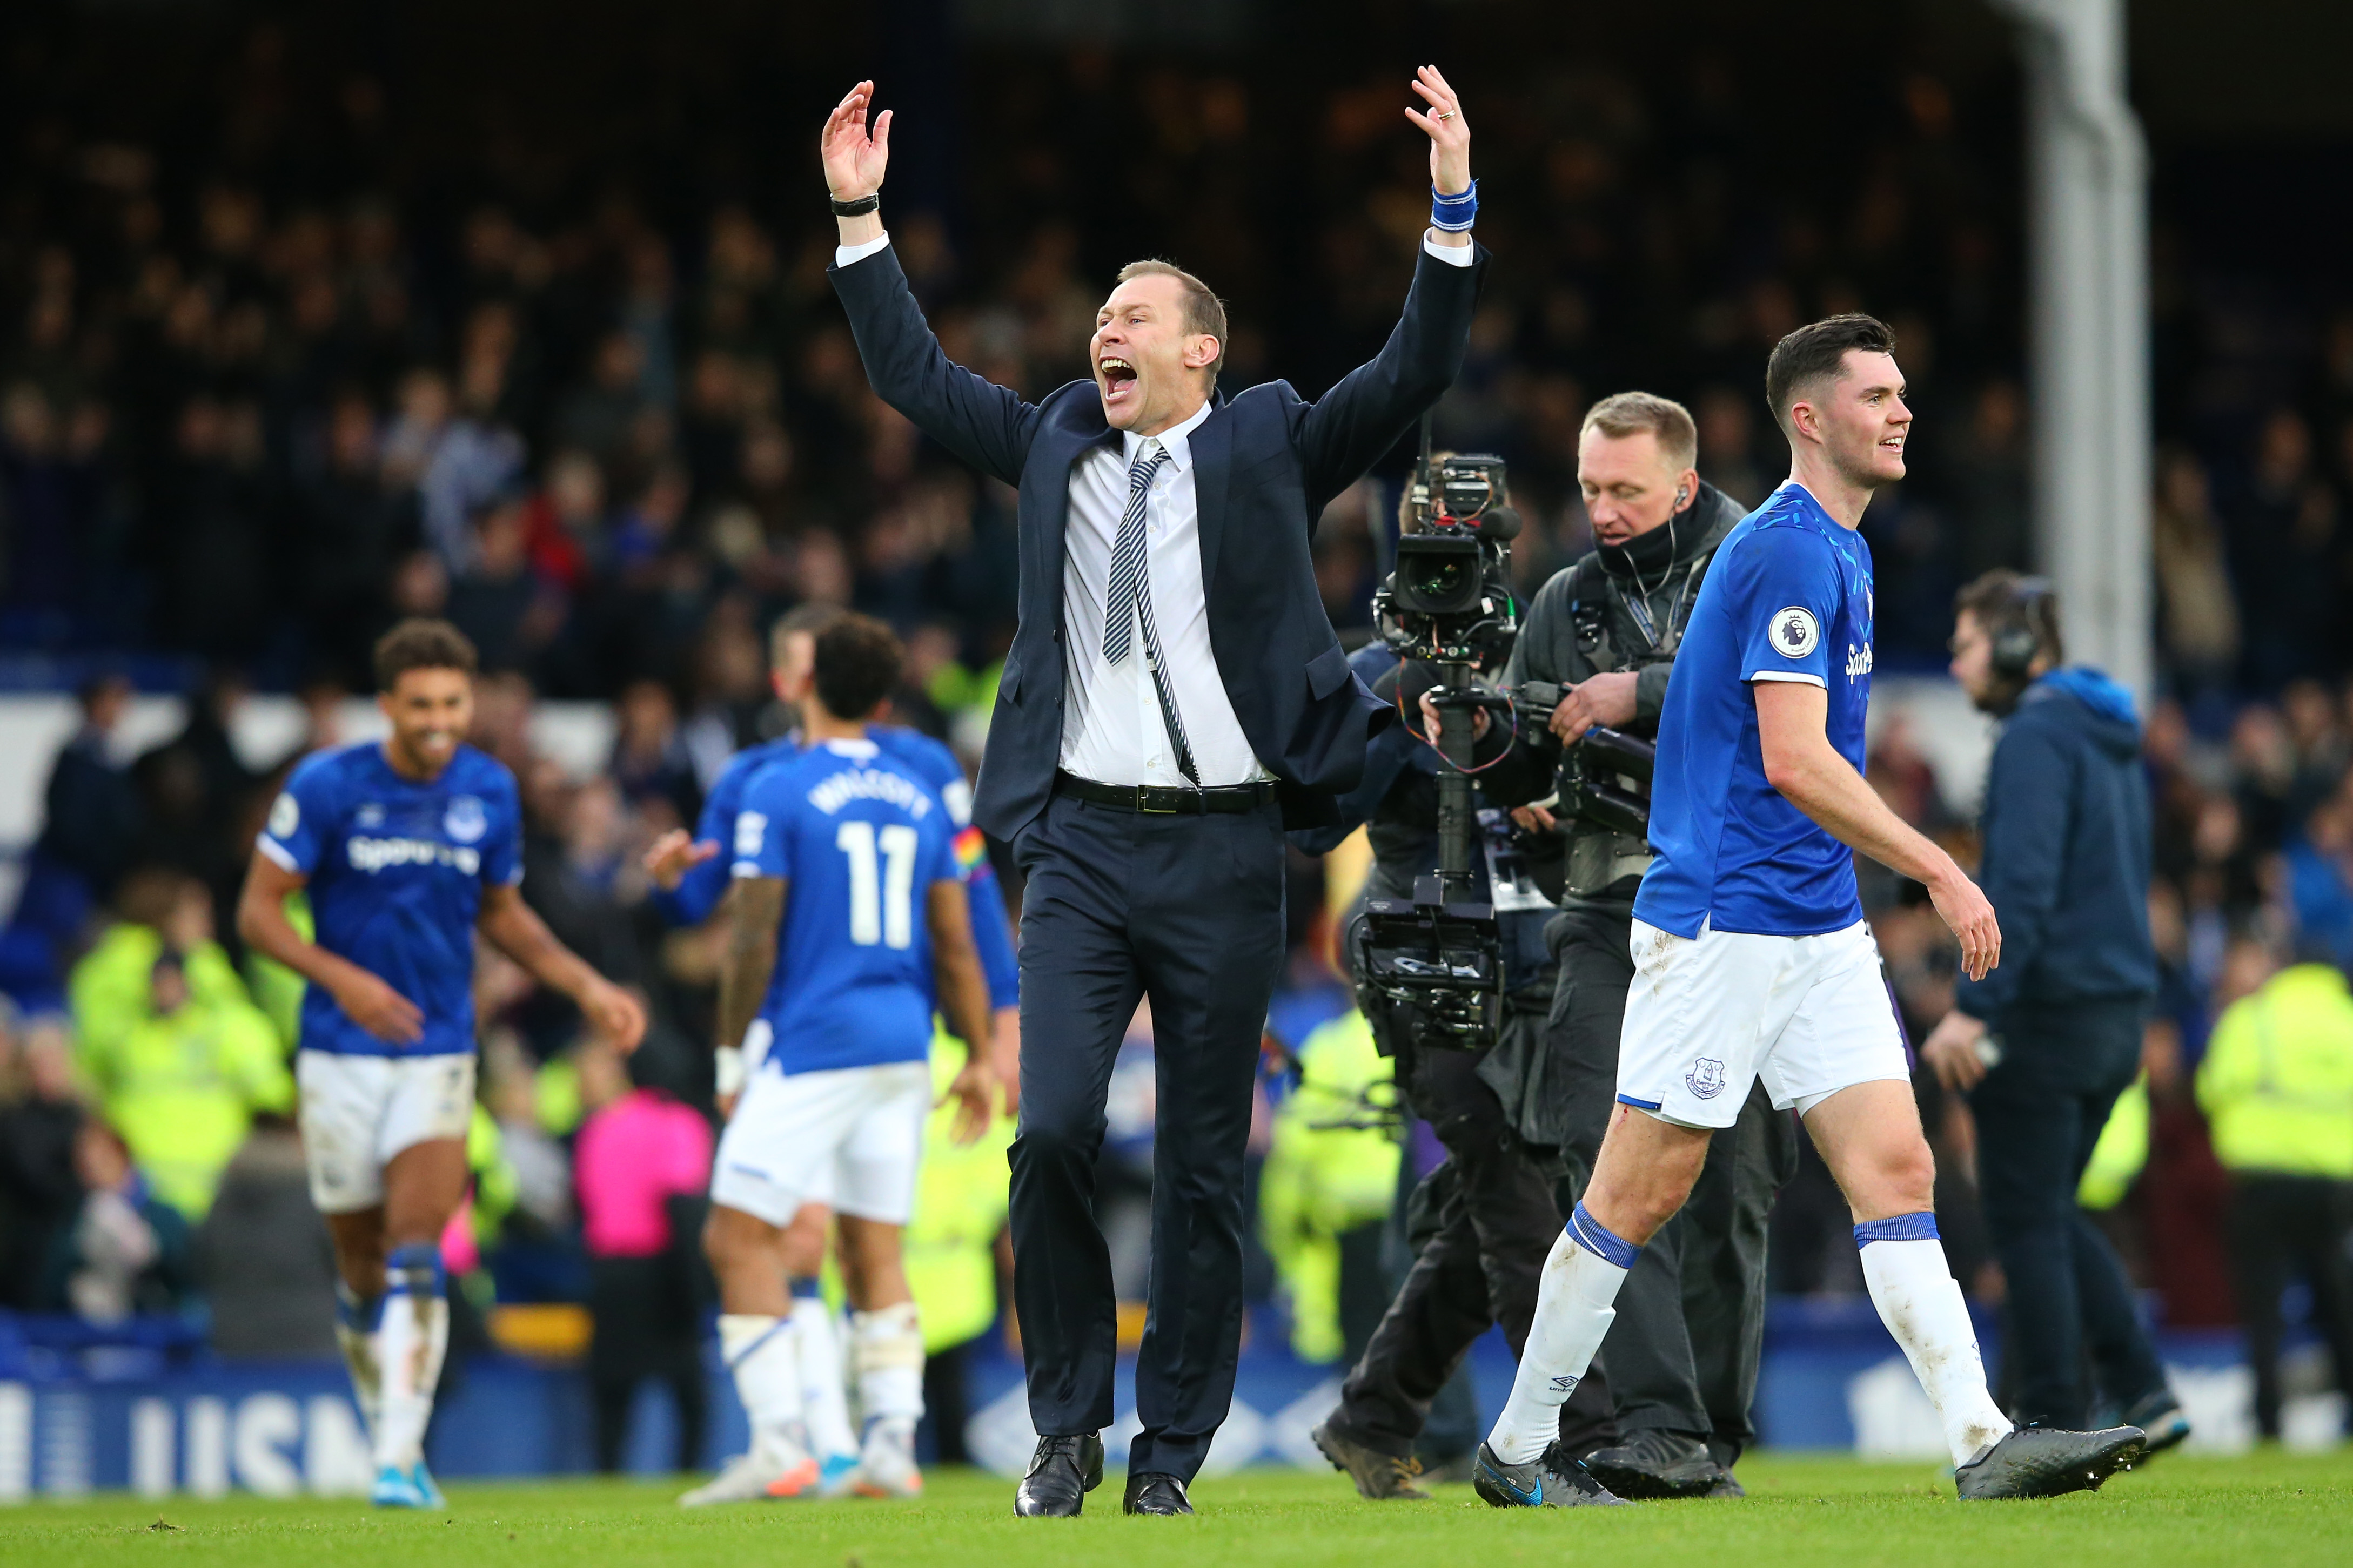 Can Duncan Ferguson inspire Everton to another win on Sunday? (Photo by Alex Livesey/Getty Images)